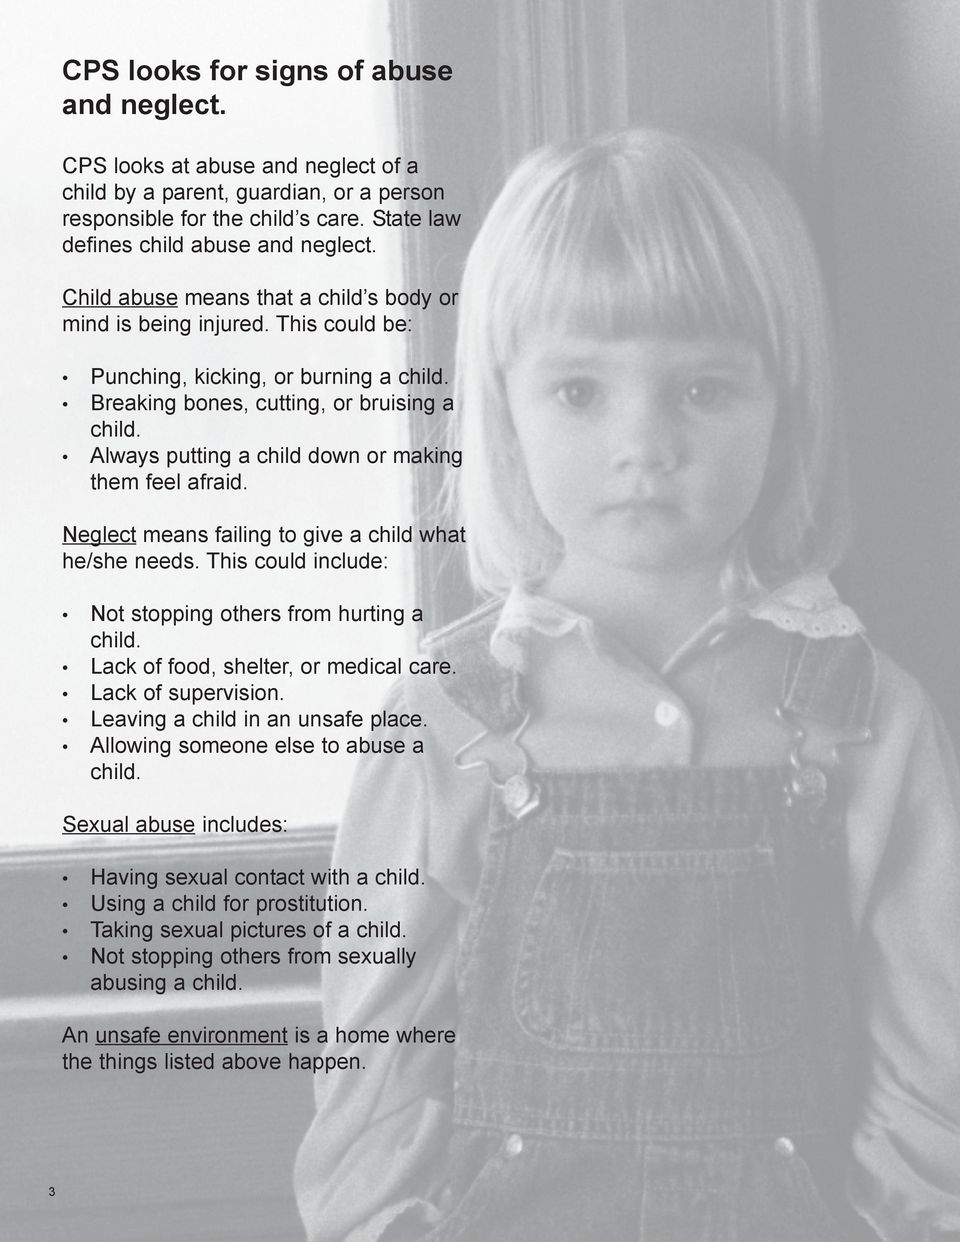 Always putting a child down or making them feel afraid. Neglect means failing to give a child what he/she needs. This could include: Not stopping others from hurting a child.